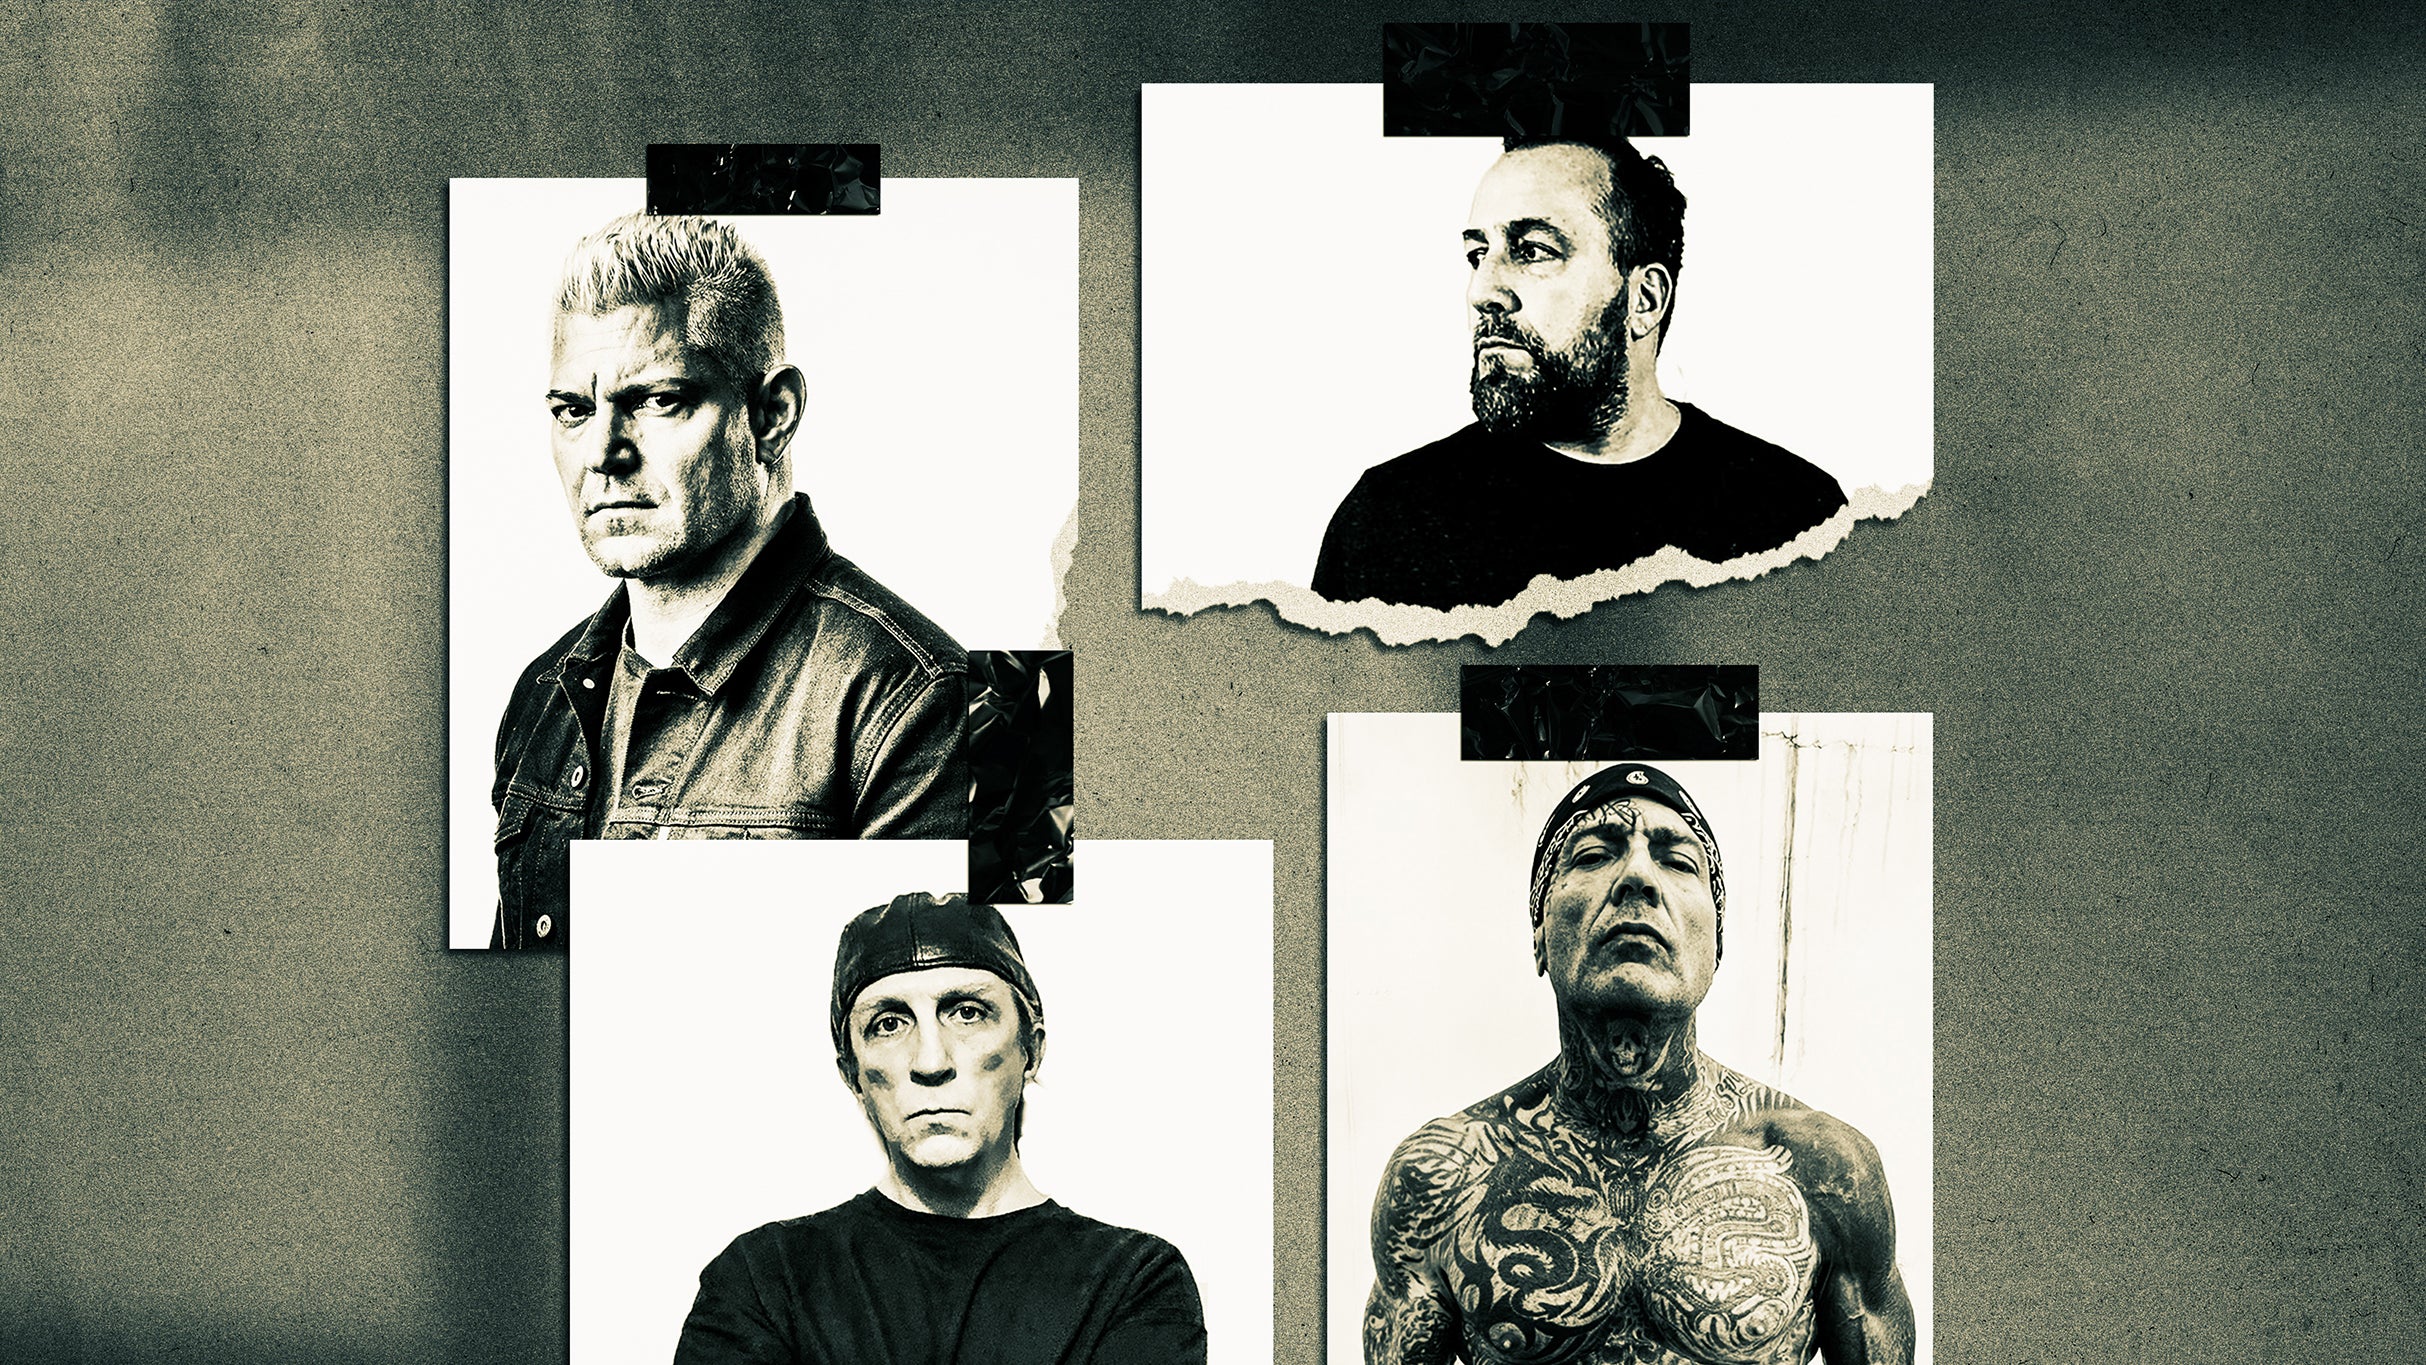 Biohazard free presale password for early tickets in New York